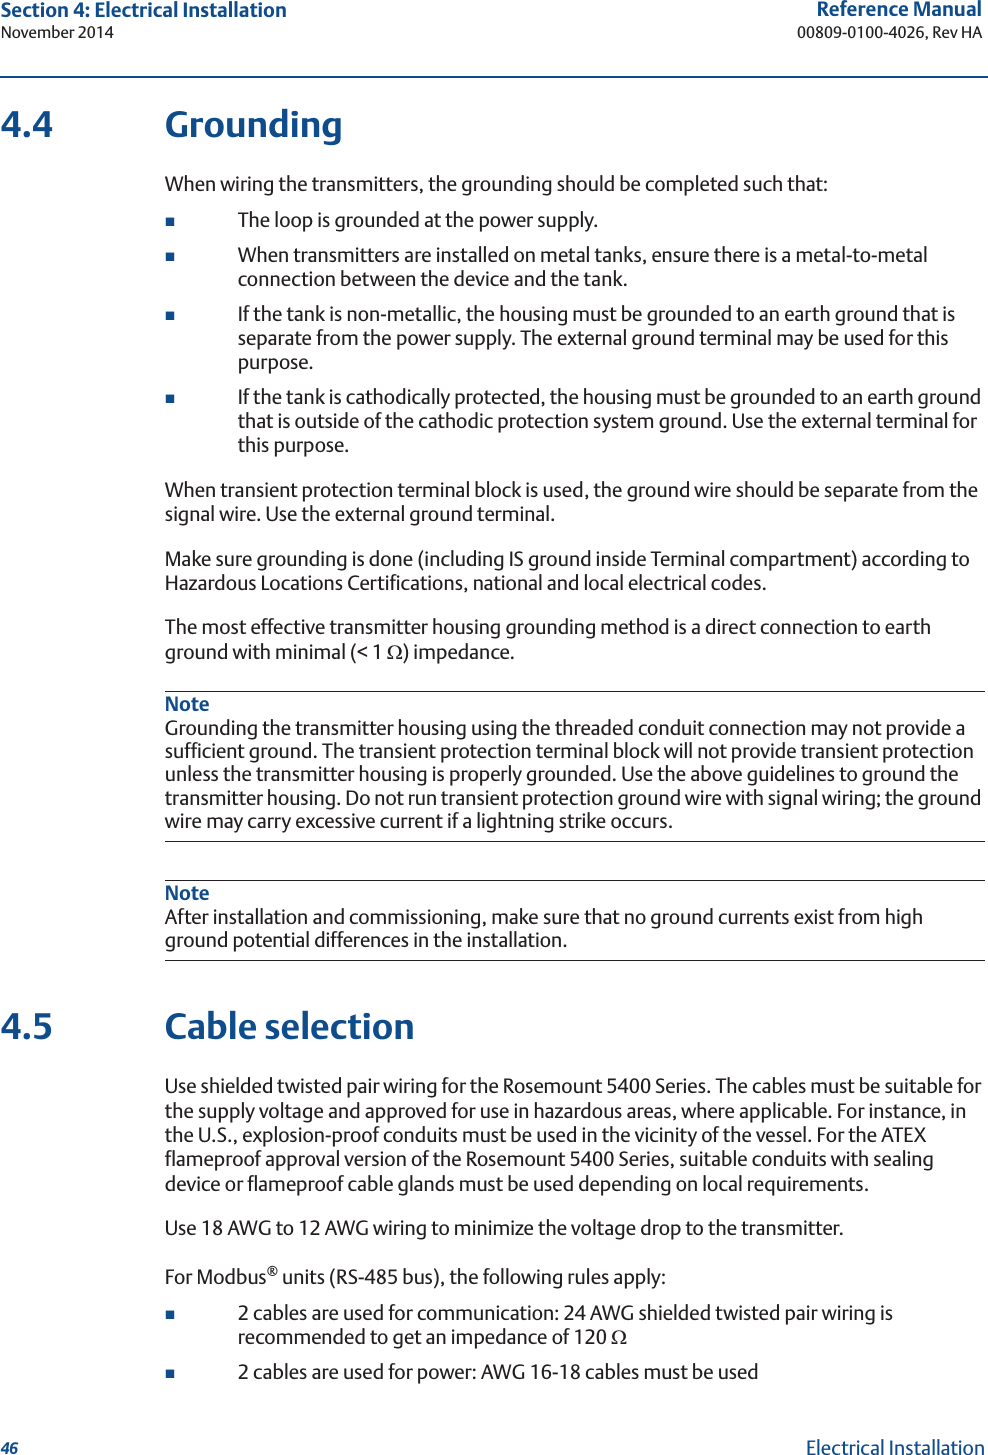 46Reference Manual00809-0100-4026, Rev HASection 4: Electrical InstallationNovember 2014Electrical Installation4.4 GroundingWhen wiring the transmitters, the grounding should be completed such that:The loop is grounded at the power supply.When transmitters are installed on metal tanks, ensure there is a metal-to-metal connection between the device and the tank. If the tank is non-metallic, the housing must be grounded to an earth ground that is separate from the power supply. The external ground terminal may be used for this purpose. If the tank is cathodically protected, the housing must be grounded to an earth ground that is outside of the cathodic protection system ground. Use the external terminal for this purpose.When transient protection terminal block is used, the ground wire should be separate from the signal wire. Use the external ground terminal.Make sure grounding is done (including IS ground inside Terminal compartment) according to Hazardous Locations Certifications, national and local electrical codes.The most effective transmitter housing grounding method is a direct connection to earth ground with minimal (&lt; 1 :) impedance.NoteGrounding the transmitter housing using the threaded conduit connection may not provide a sufficient ground. The transient protection terminal block will not provide transient protection unless the transmitter housing is properly grounded. Use the above guidelines to ground the transmitter housing. Do not run transient protection ground wire with signal wiring; the ground wire may carry excessive current if a lightning strike occurs.NoteAfter installation and commissioning, make sure that no ground currents exist from high ground potential differences in the installation.4.5 Cable selectionUse shielded twisted pair wiring for the Rosemount 5400 Series. The cables must be suitable for the supply voltage and approved for use in hazardous areas, where applicable. For instance, in the U.S., explosion-proof conduits must be used in the vicinity of the vessel. For the ATEX flameproof approval version of the Rosemount 5400 Series, suitable conduits with sealing device or flameproof cable glands must be used depending on local requirements.Use 18 AWG to 12 AWG wiring to minimize the voltage drop to the transmitter.For Modbus® units (RS-485 bus), the following rules apply: 2 cables are used for communication: 24 AWG shielded twisted pair wiring is recommended to get an impedance of 120 :2 cables are used for power: AWG 16-18 cables must be used